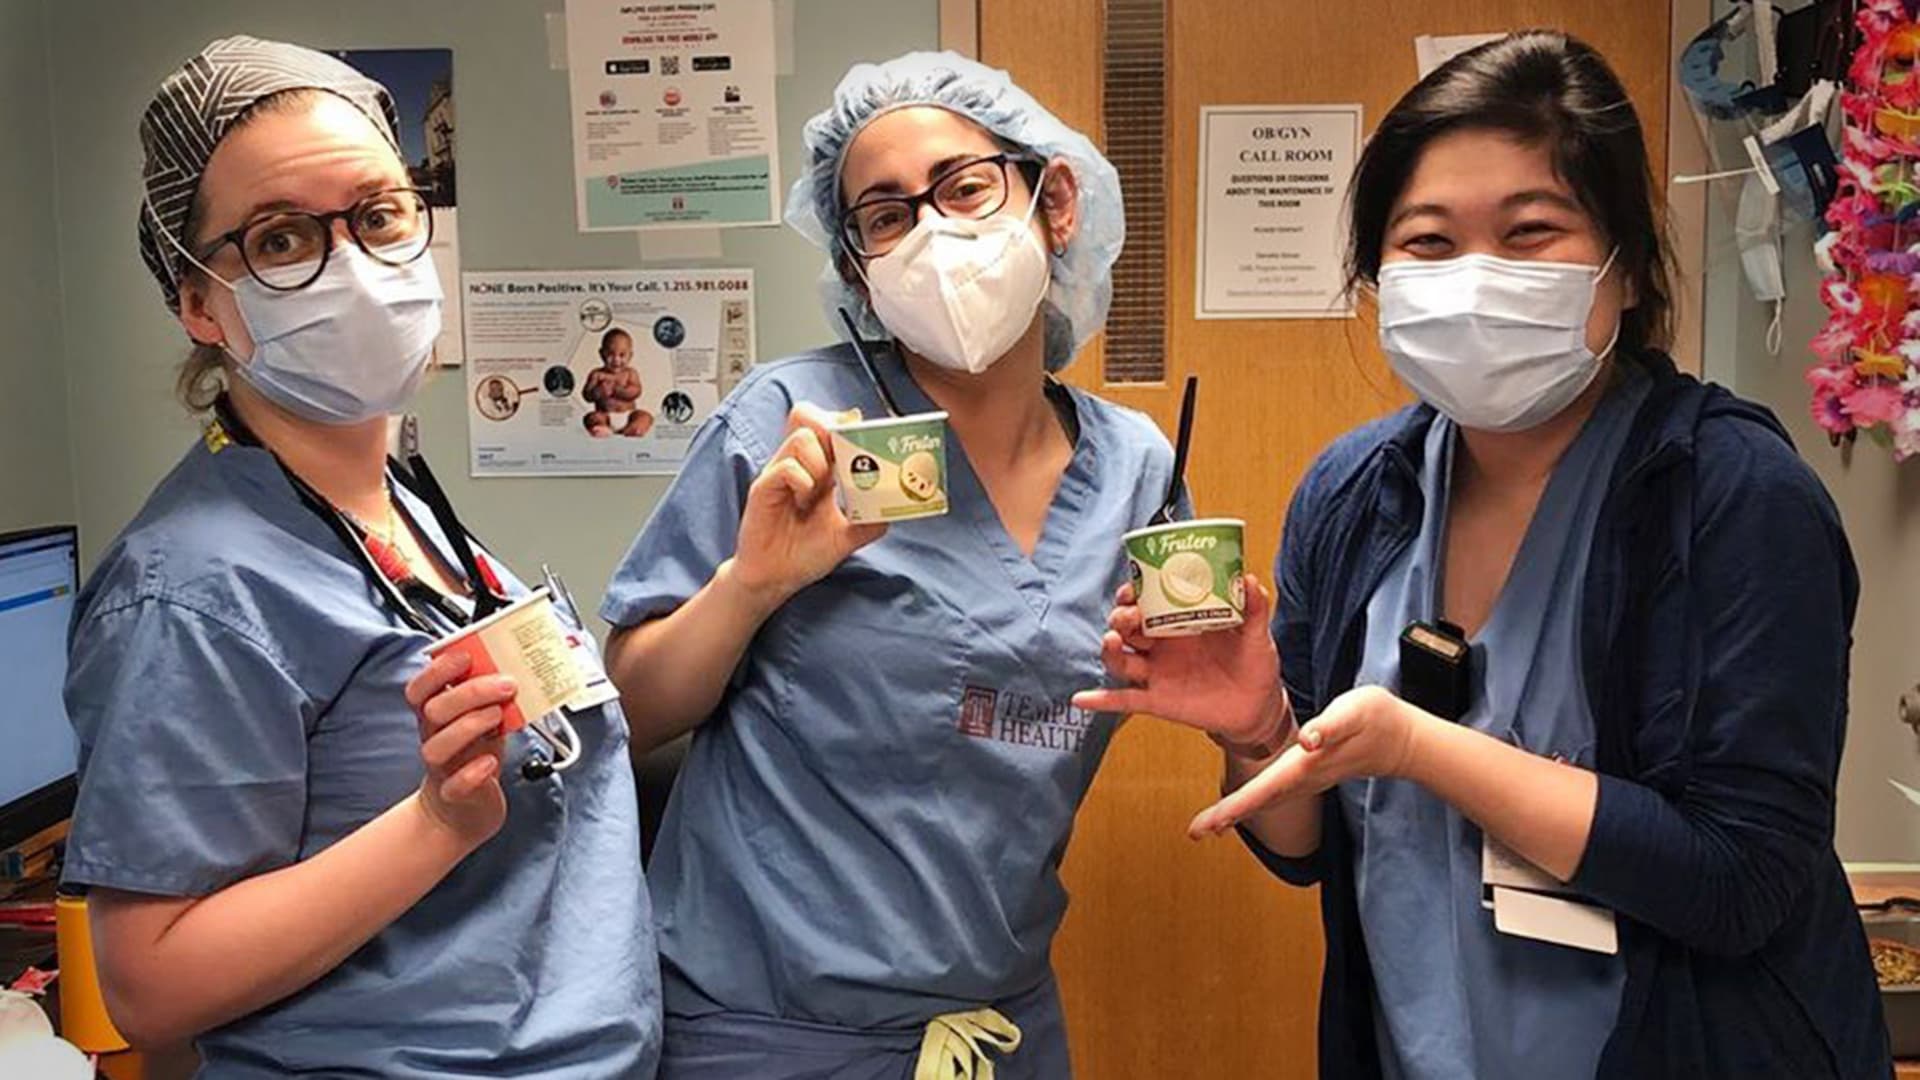 Hospital workers pose with ice cream